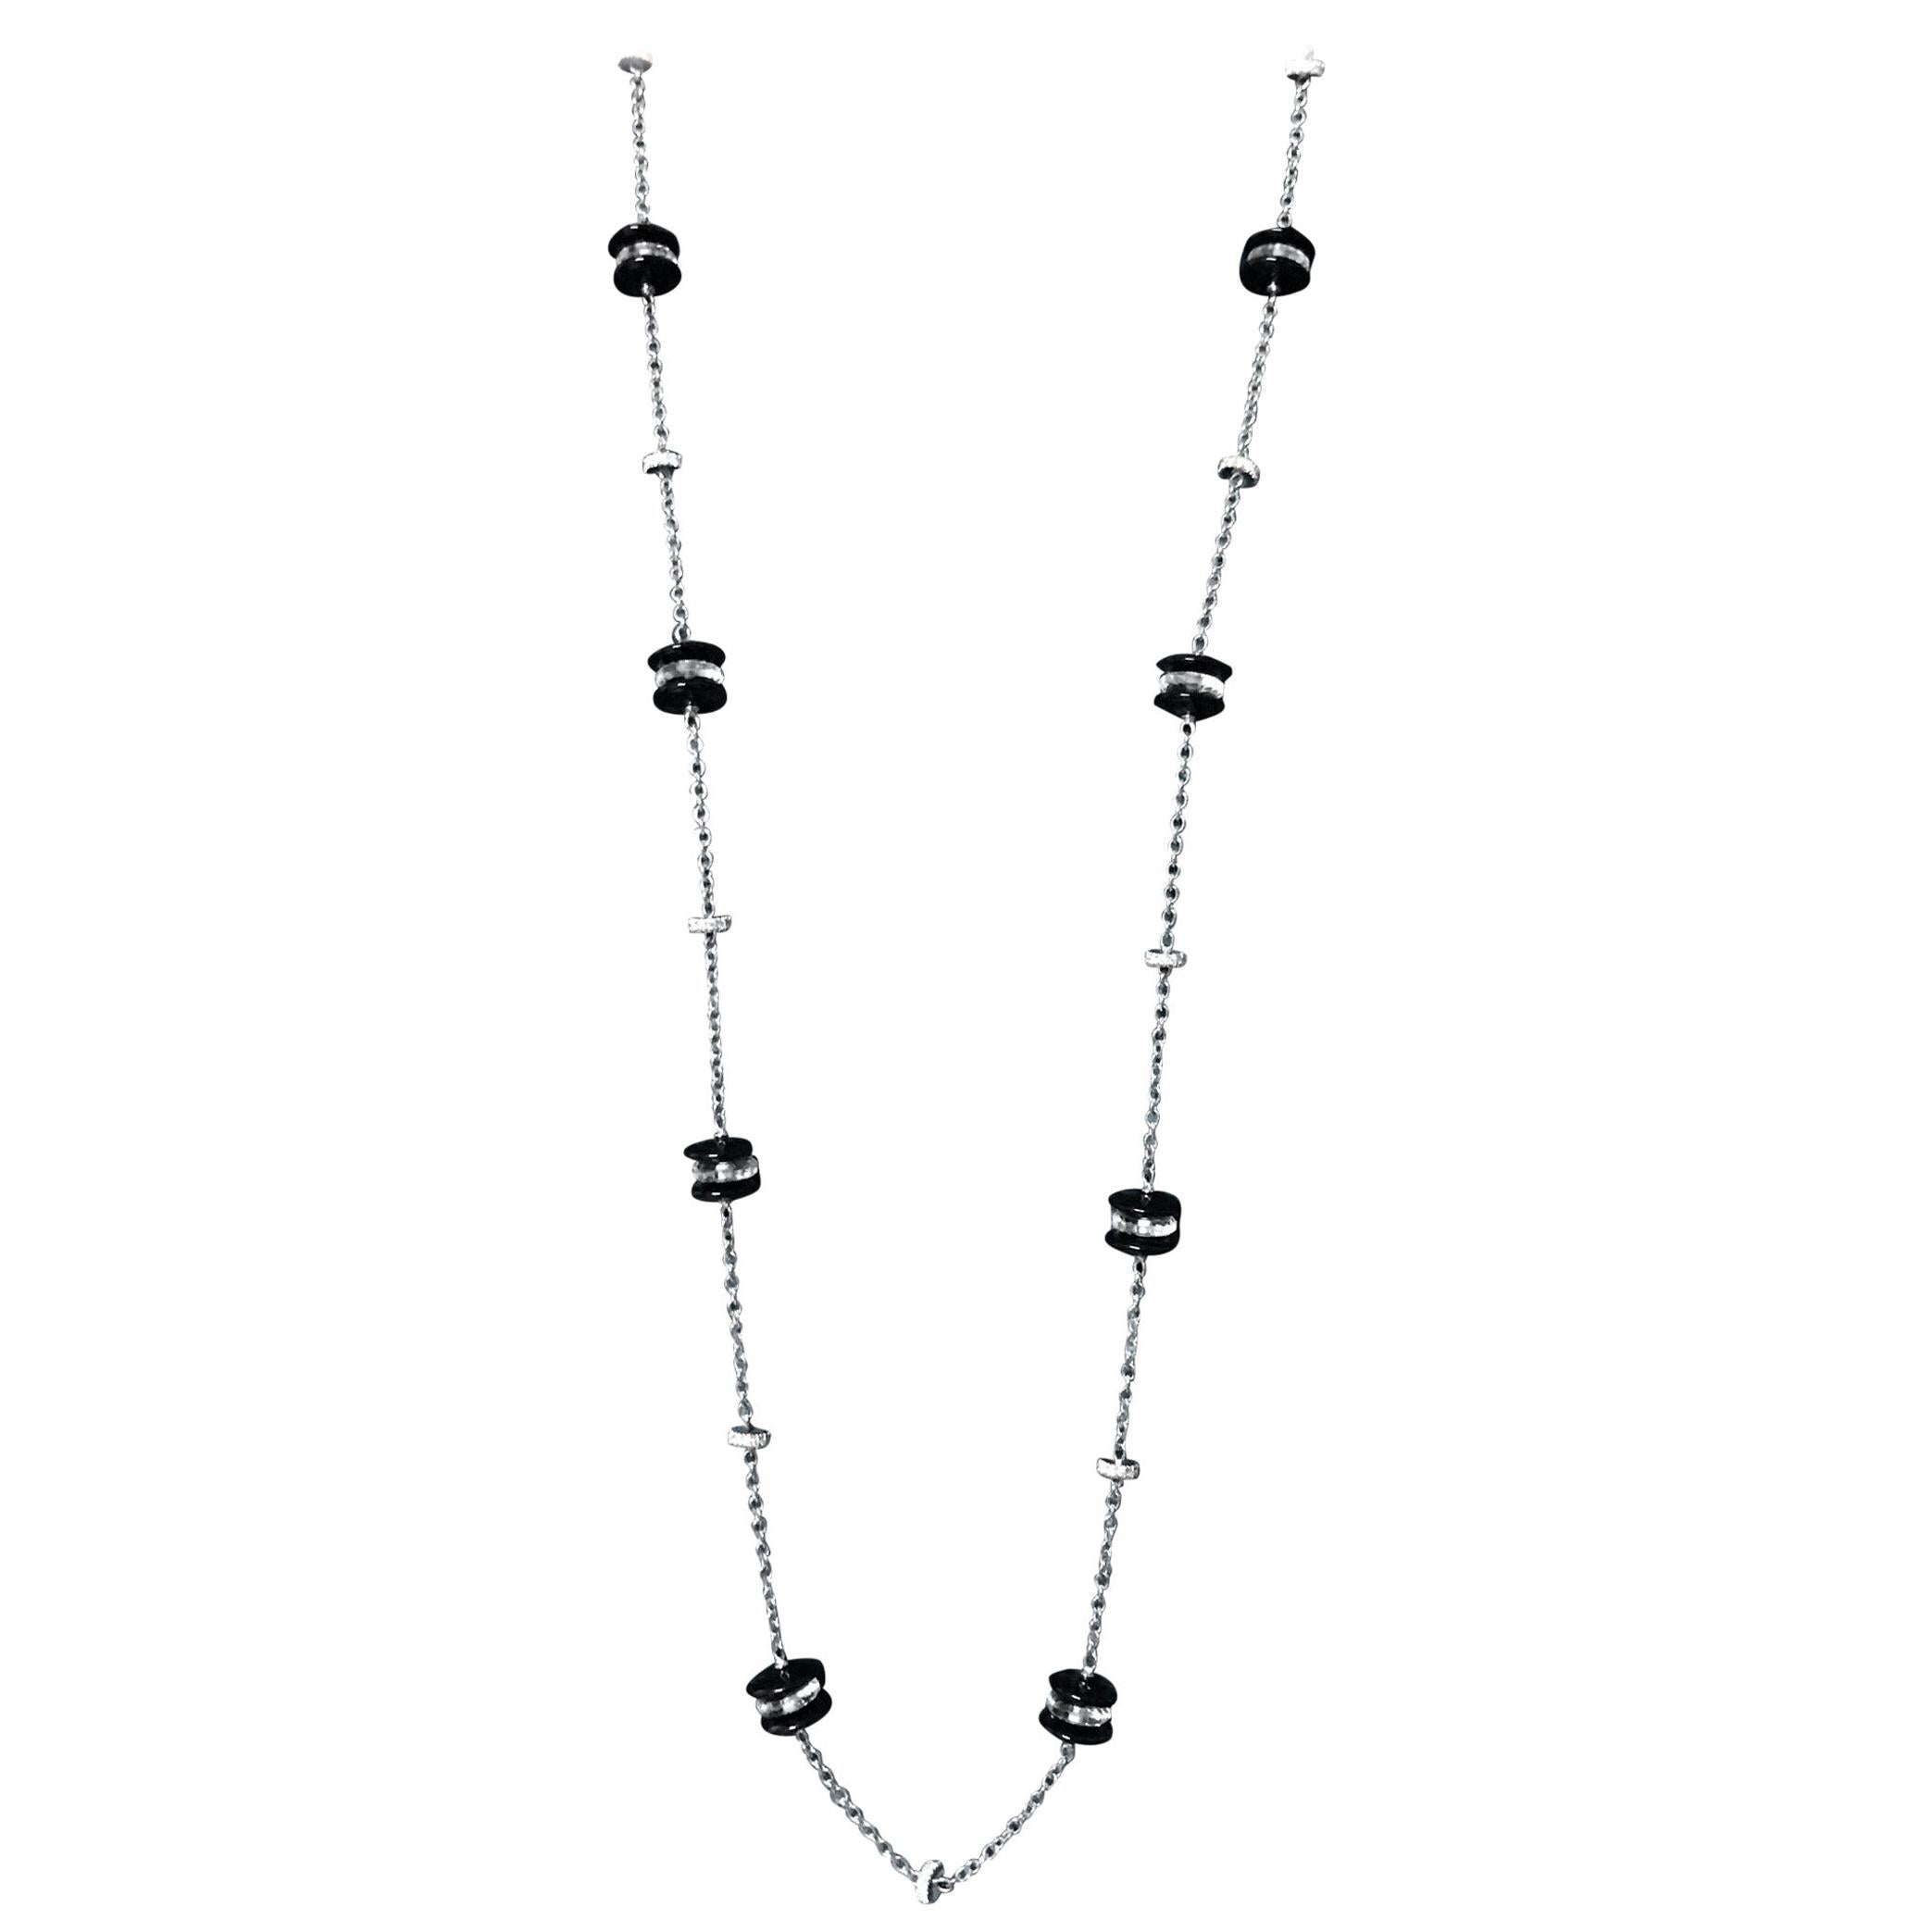 This elegant long necklace has been designed and  handcrafted in Italy, in Margherita Burgener family workshop.
The 18 KT white gold rolò chain is decorated by onyx rondels, faceted rock crystal rondels and  diamond spacers. 
Can be worn doubled,